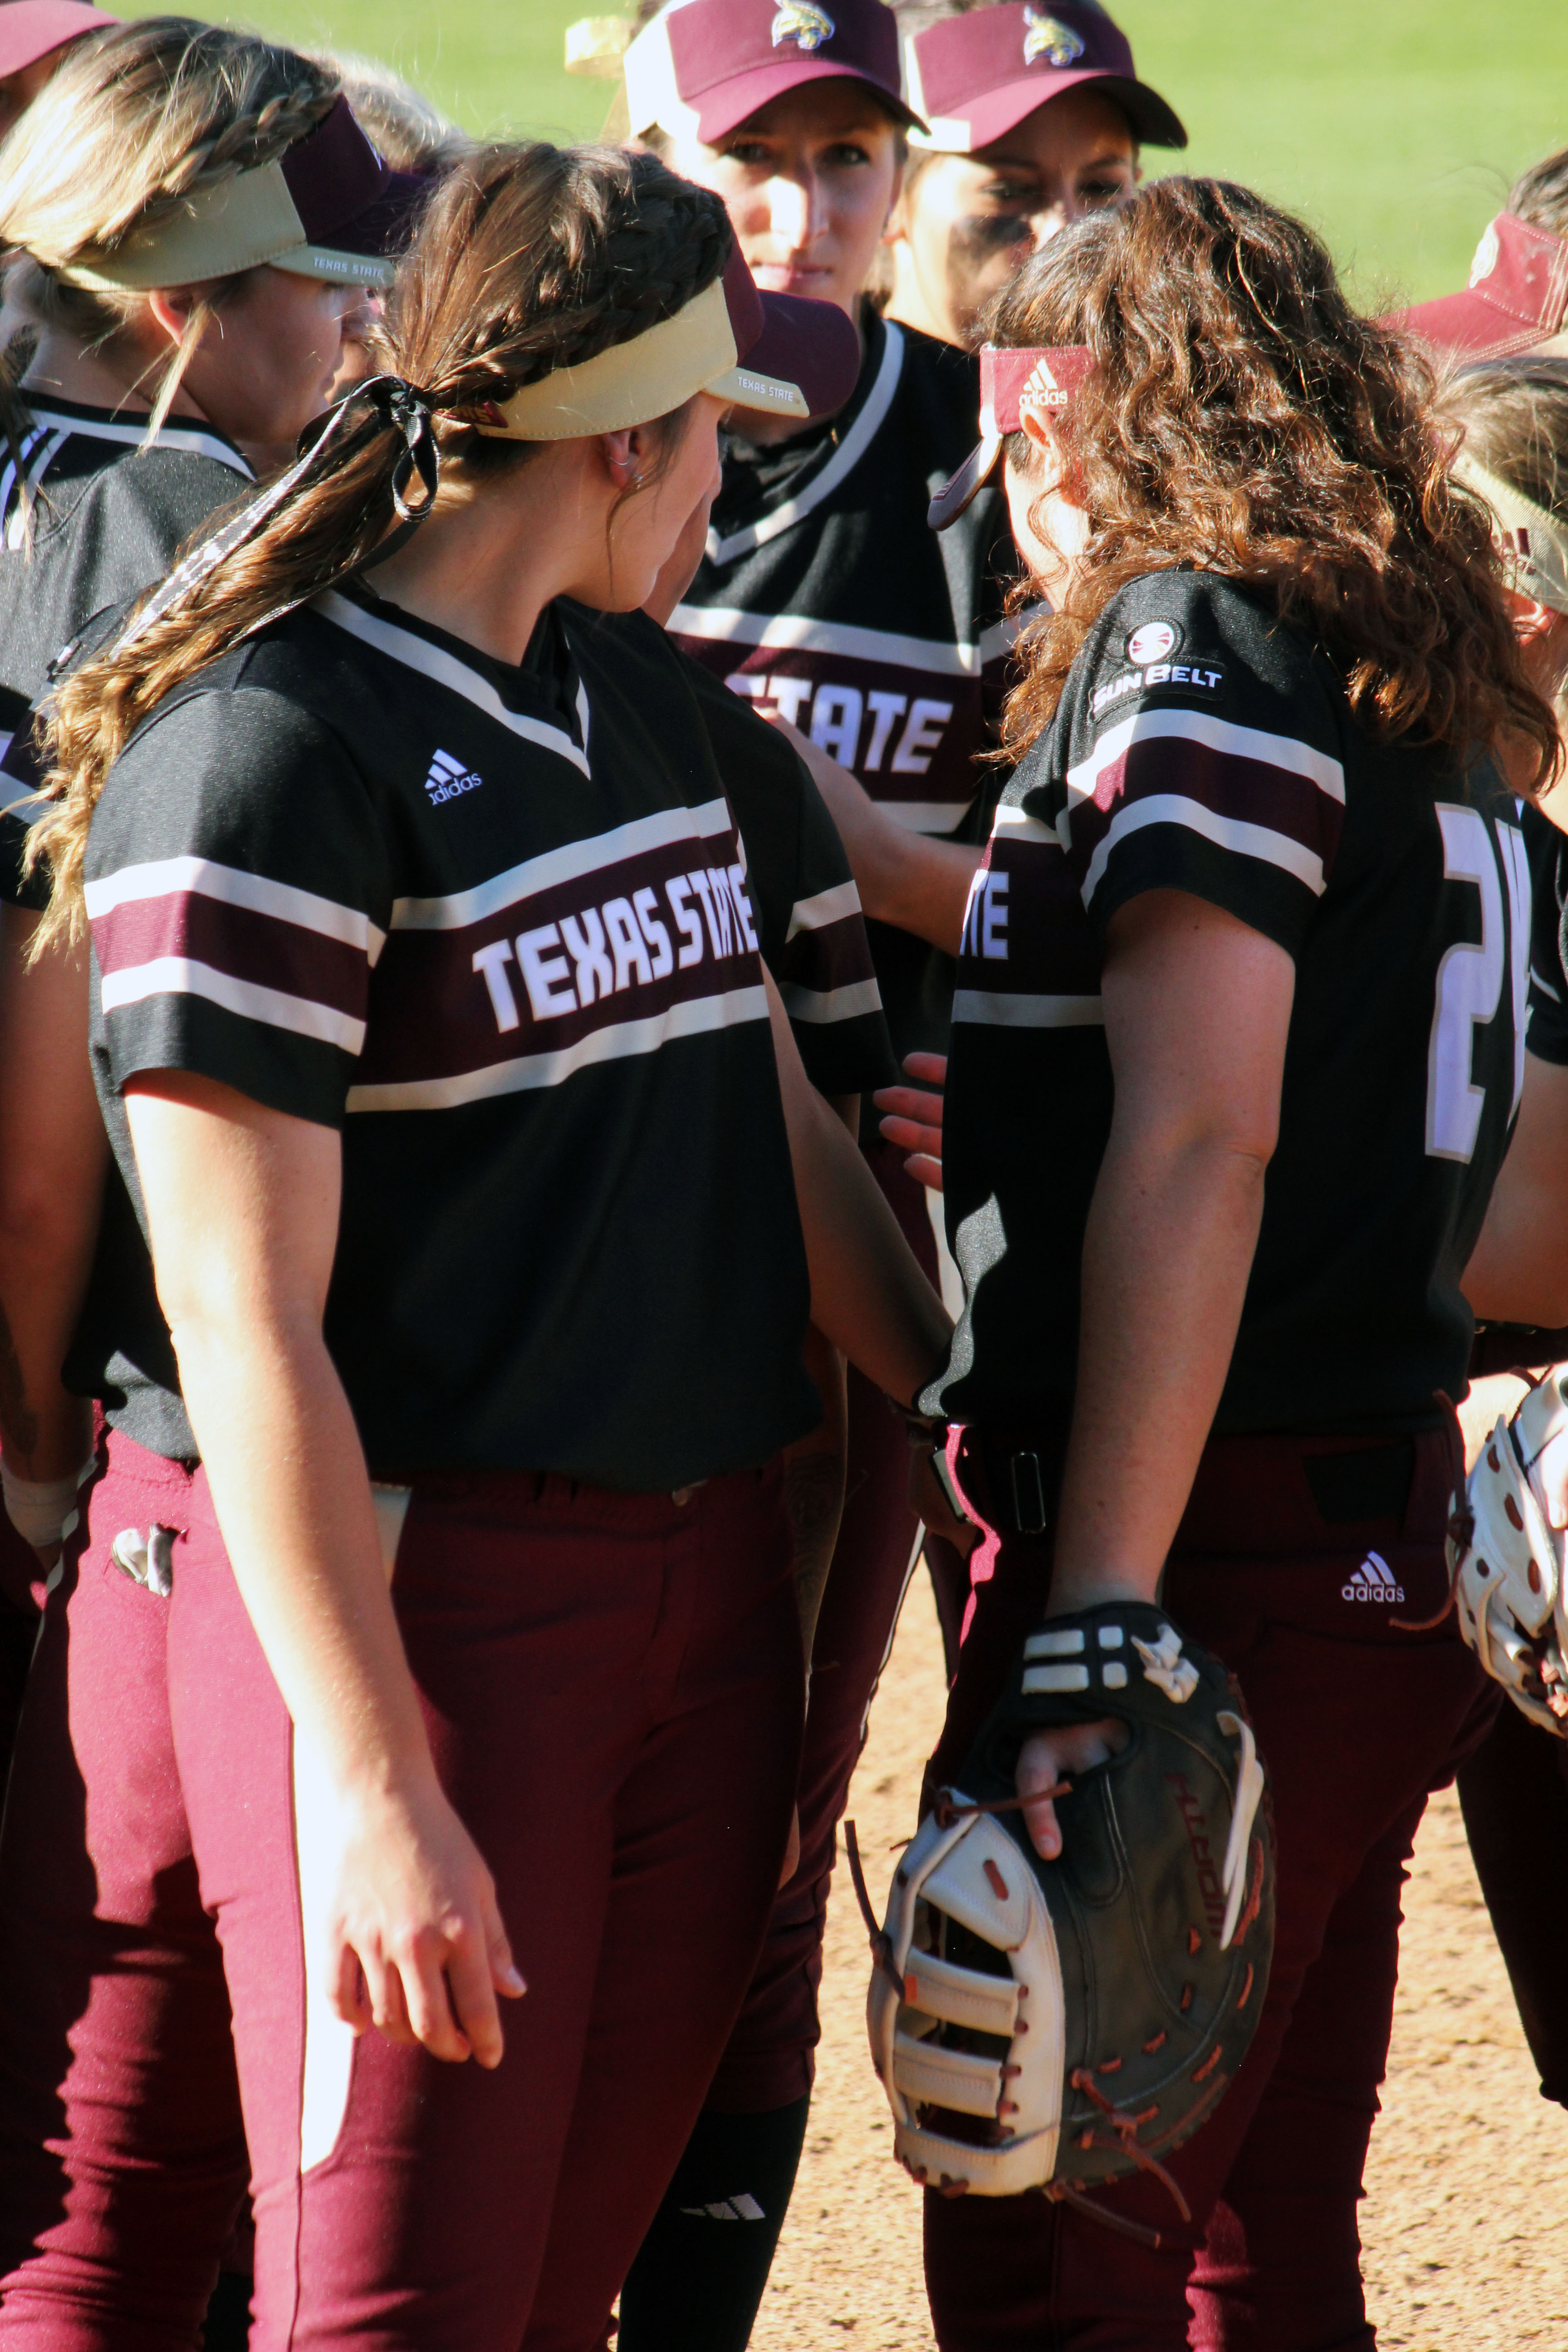 The Texas State softball team will be playing in the Tuscaloosa regional tournament. Photo by Madison Tyson.